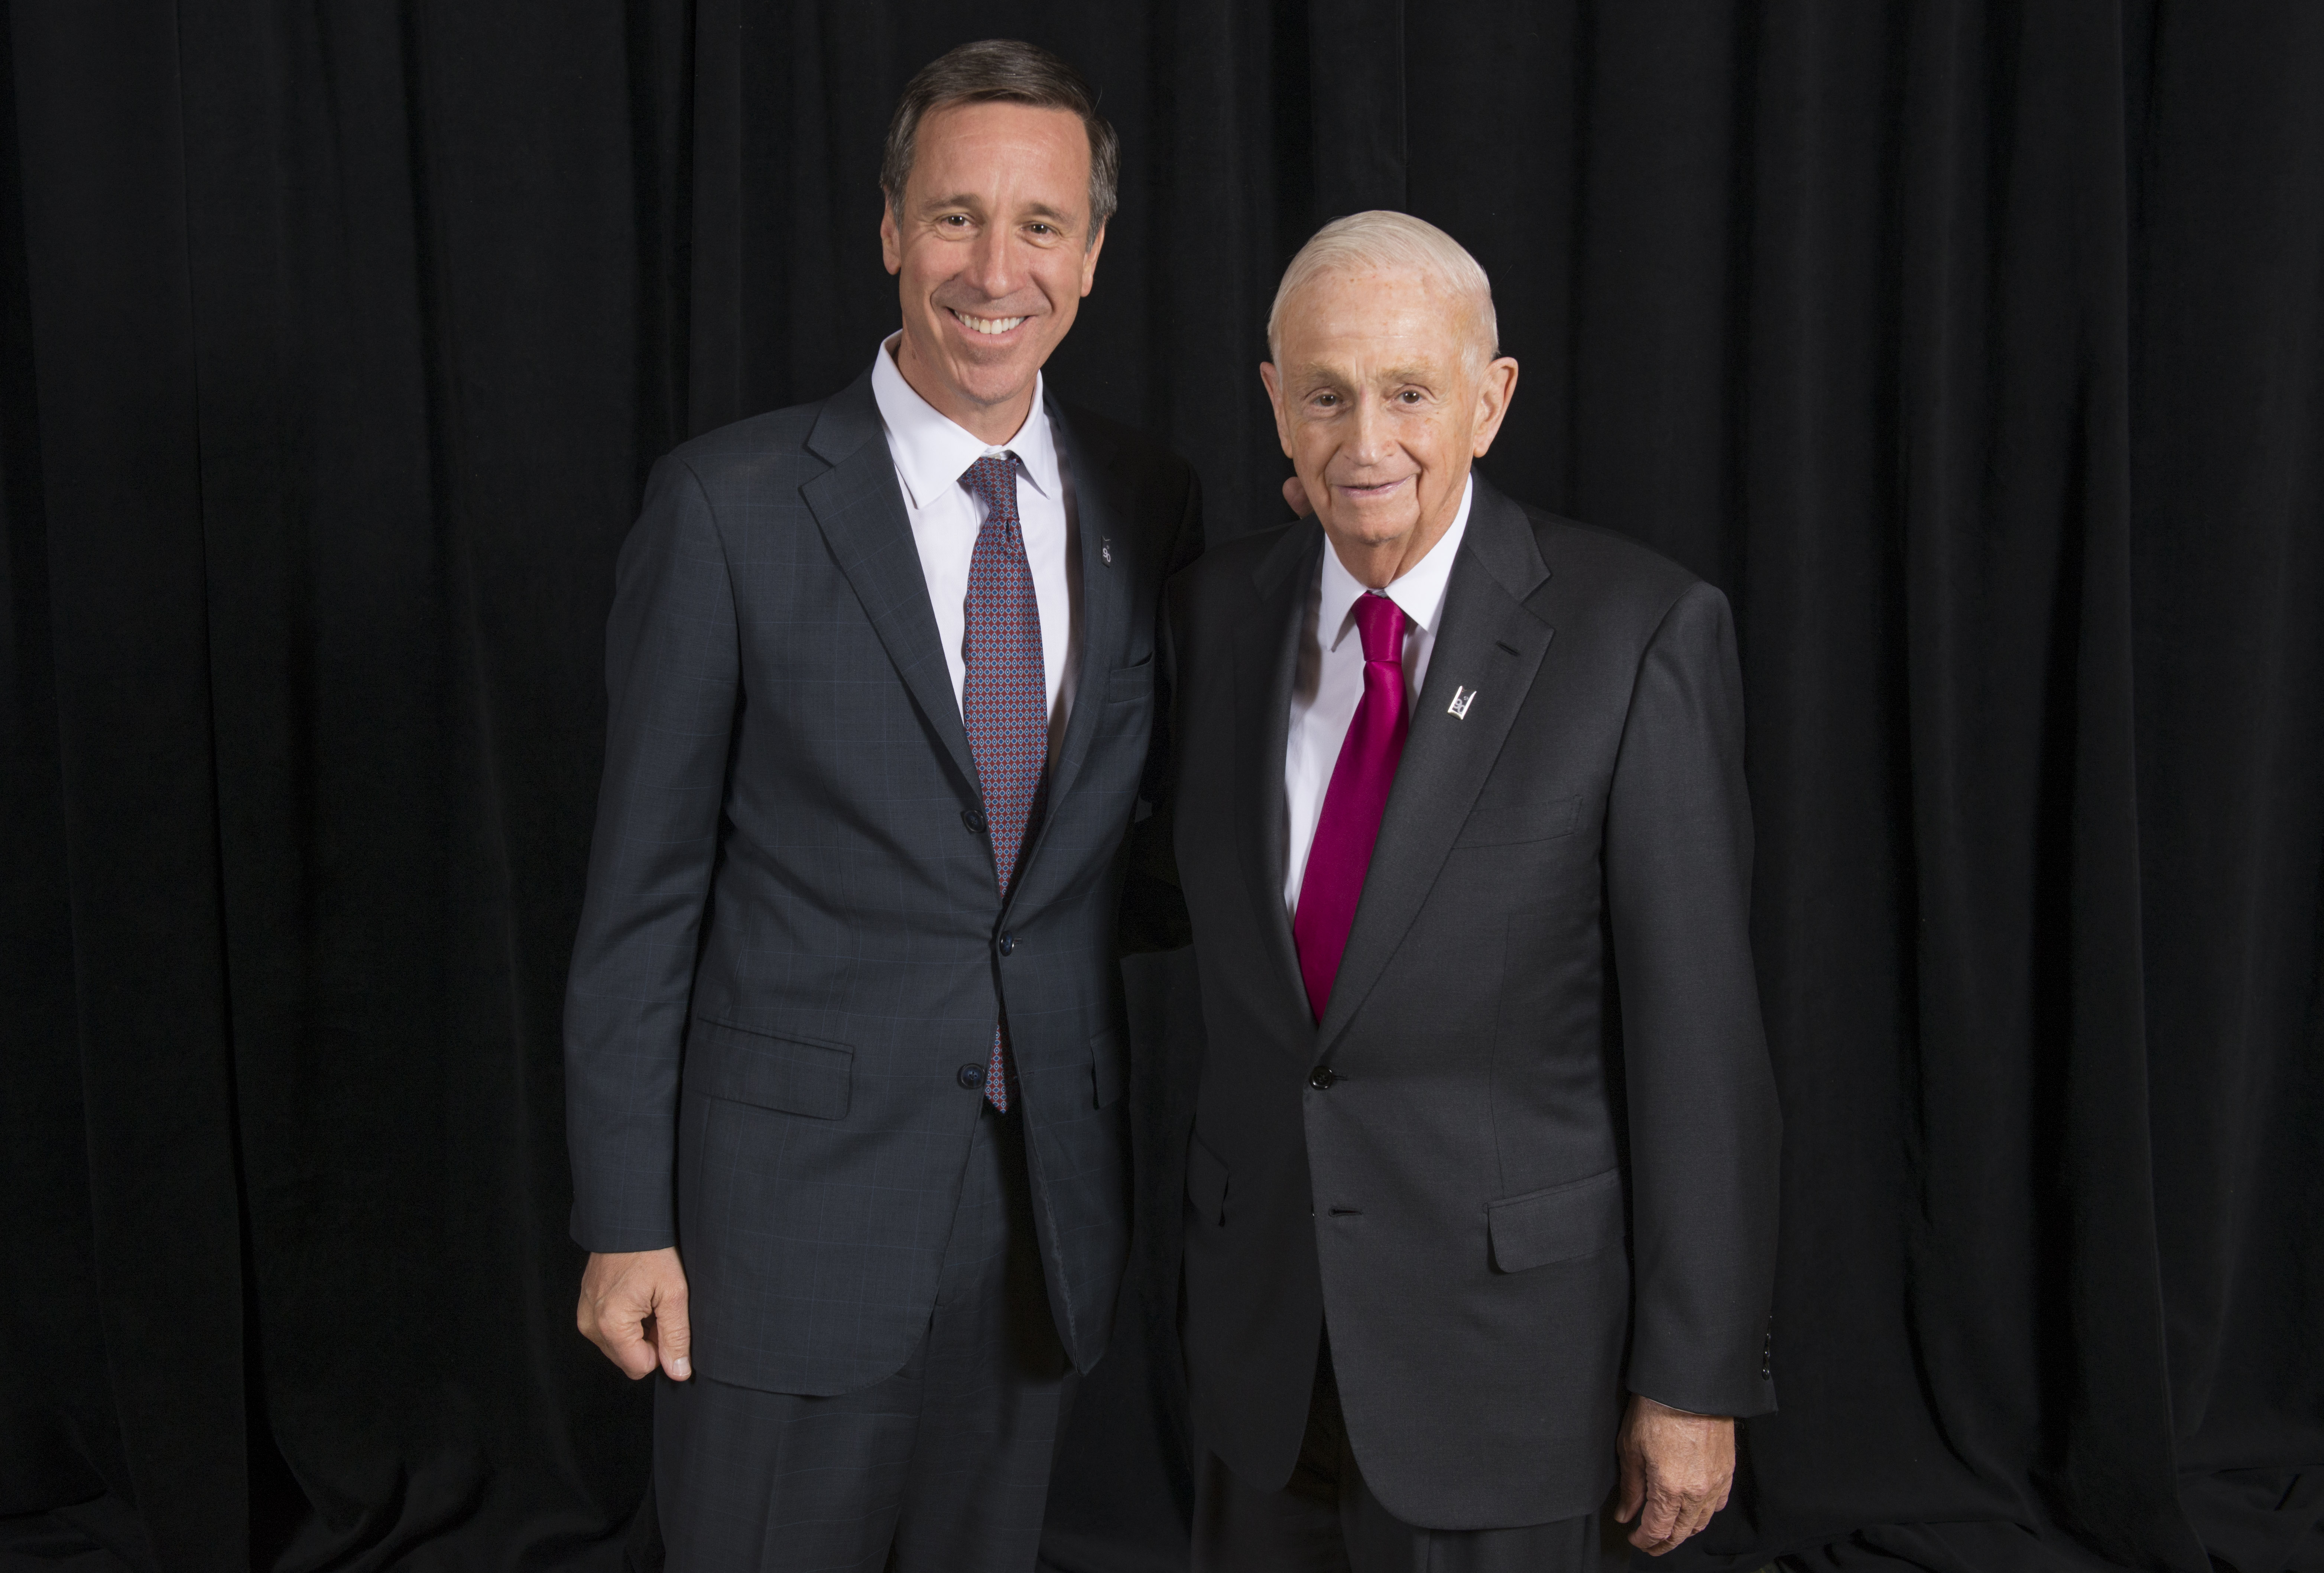 Bill Marriott has said one his wisest decisions was choosing Arne Sorenson to succeed him as CEO